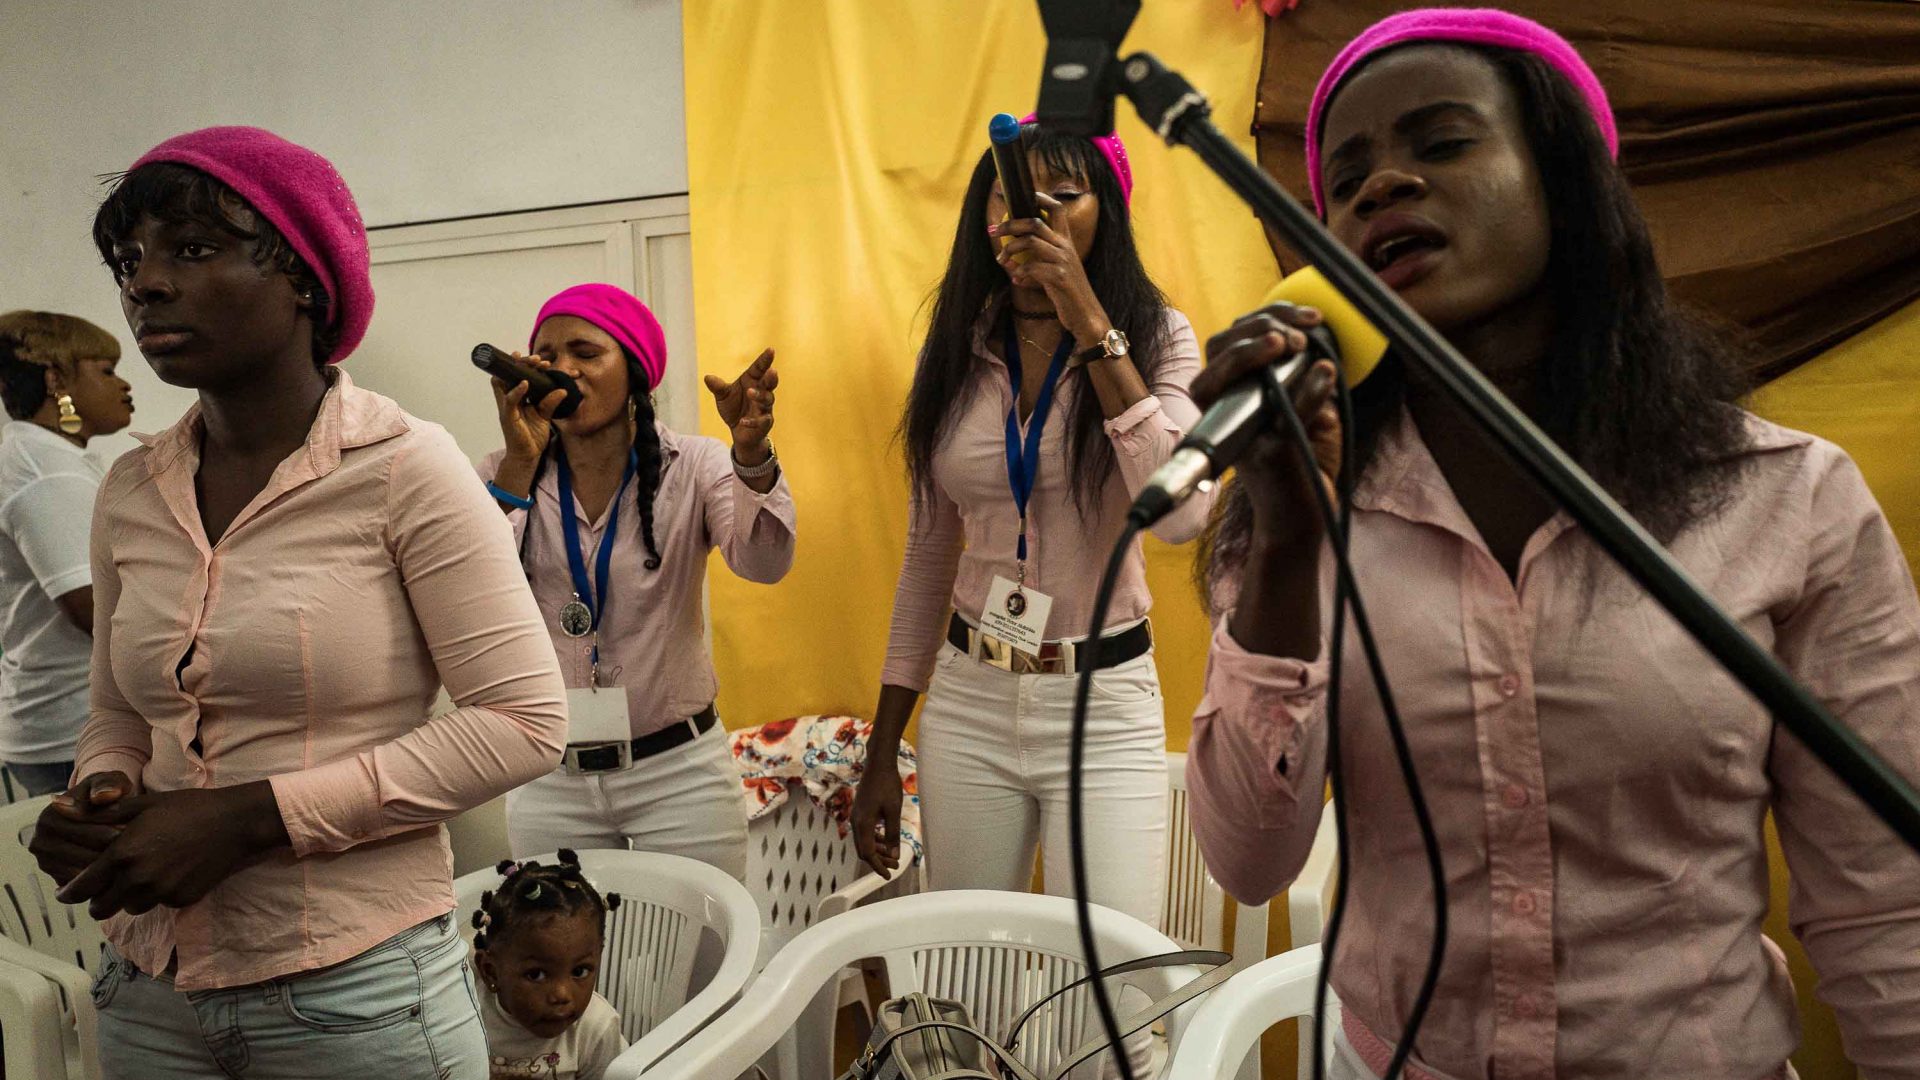 Nigerian women singing gospel at the ‘salvation evangelical church’ of Riace for the Sunday mass.